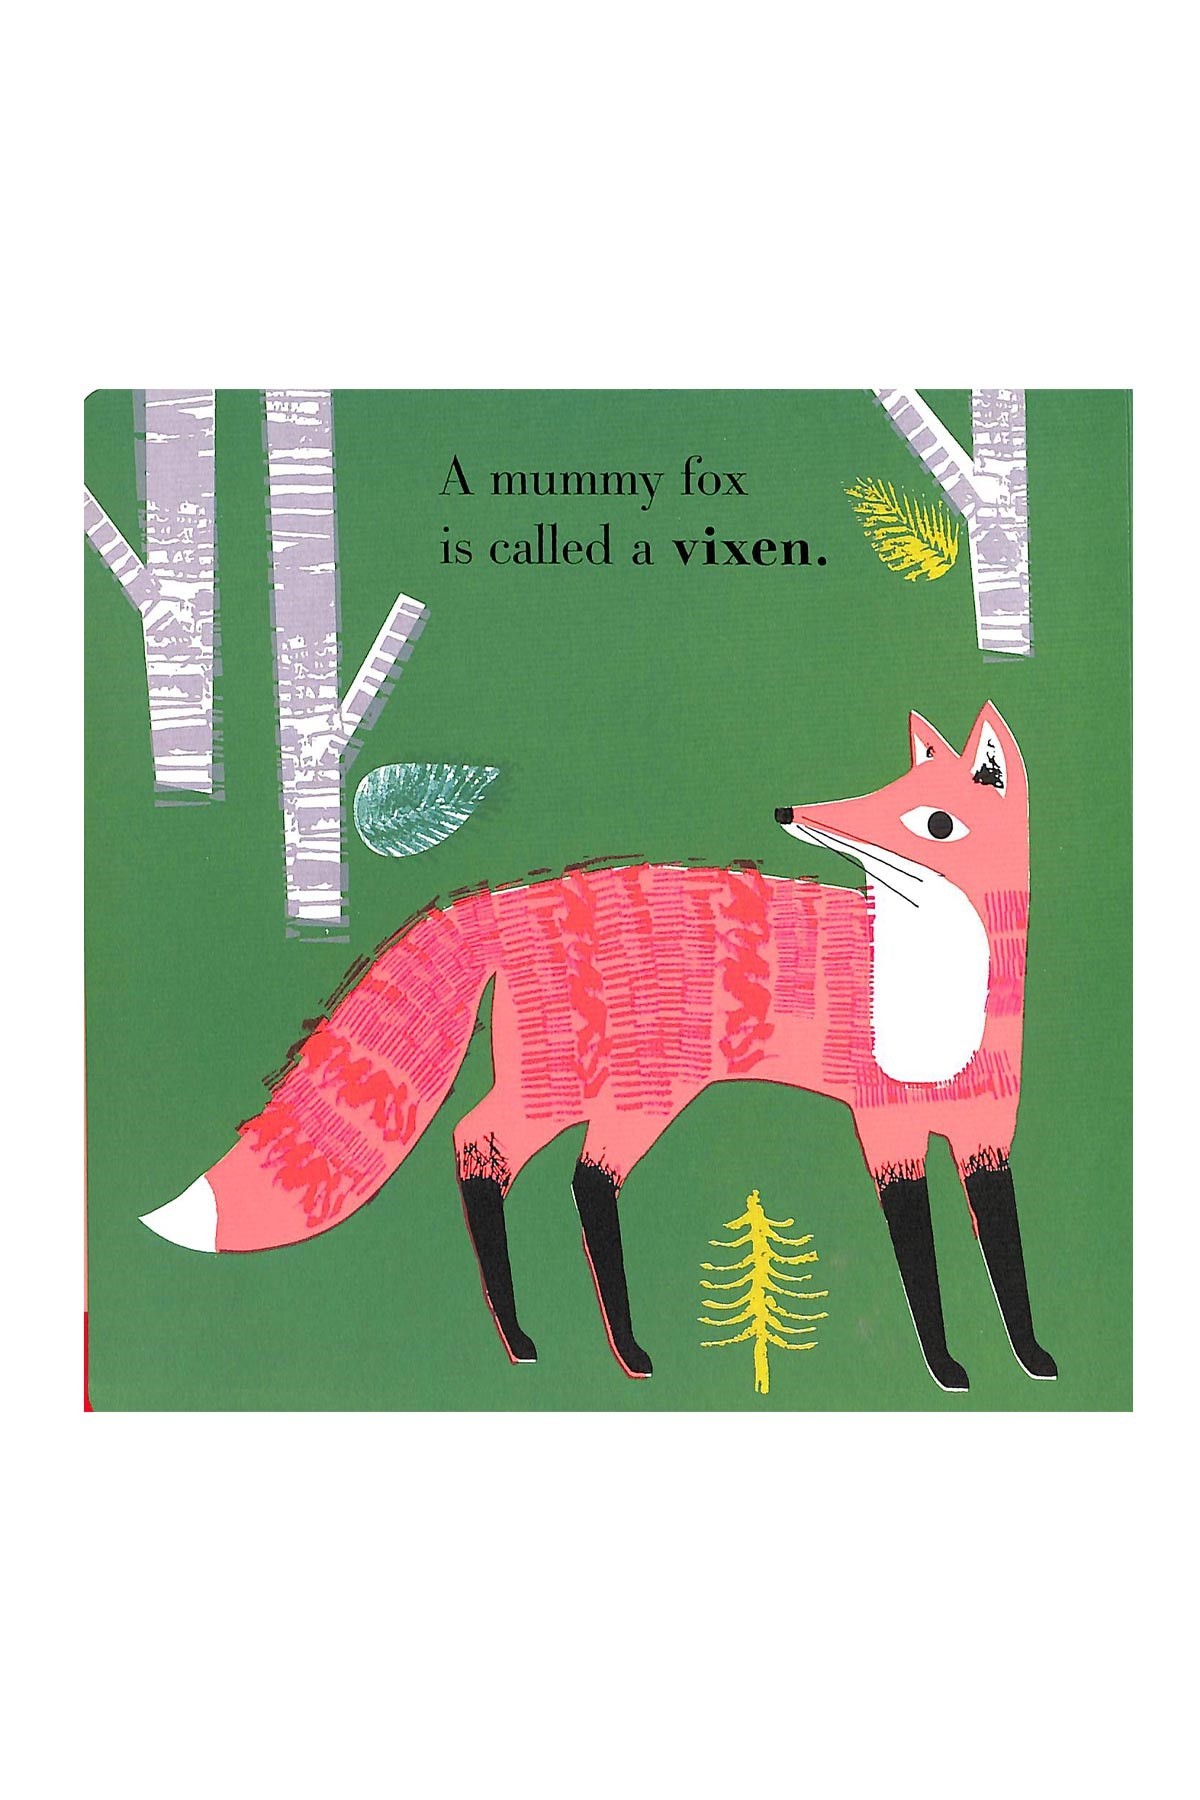 Nosy Crow Animal Families: Forest